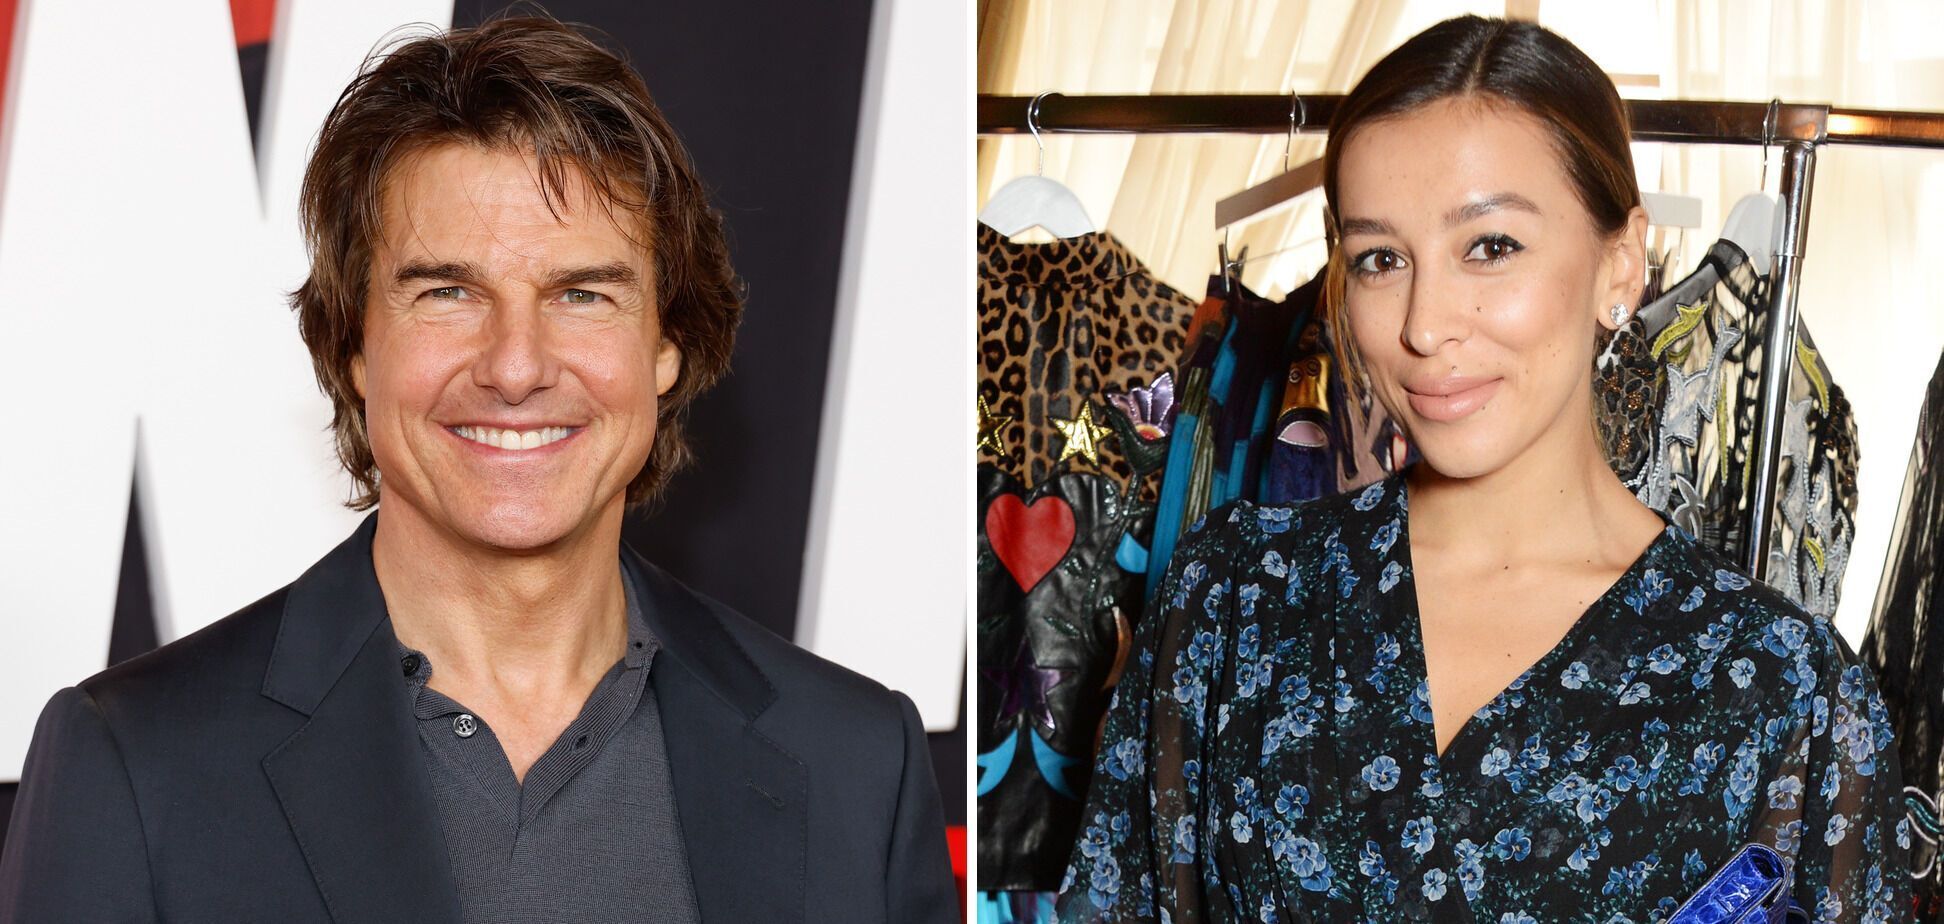 ''Keep your eyes and wallet open as she's hard to satisfy'': Elsina Khayrova's ex-husband gives a ''friendly'' advice to Tom Cruise